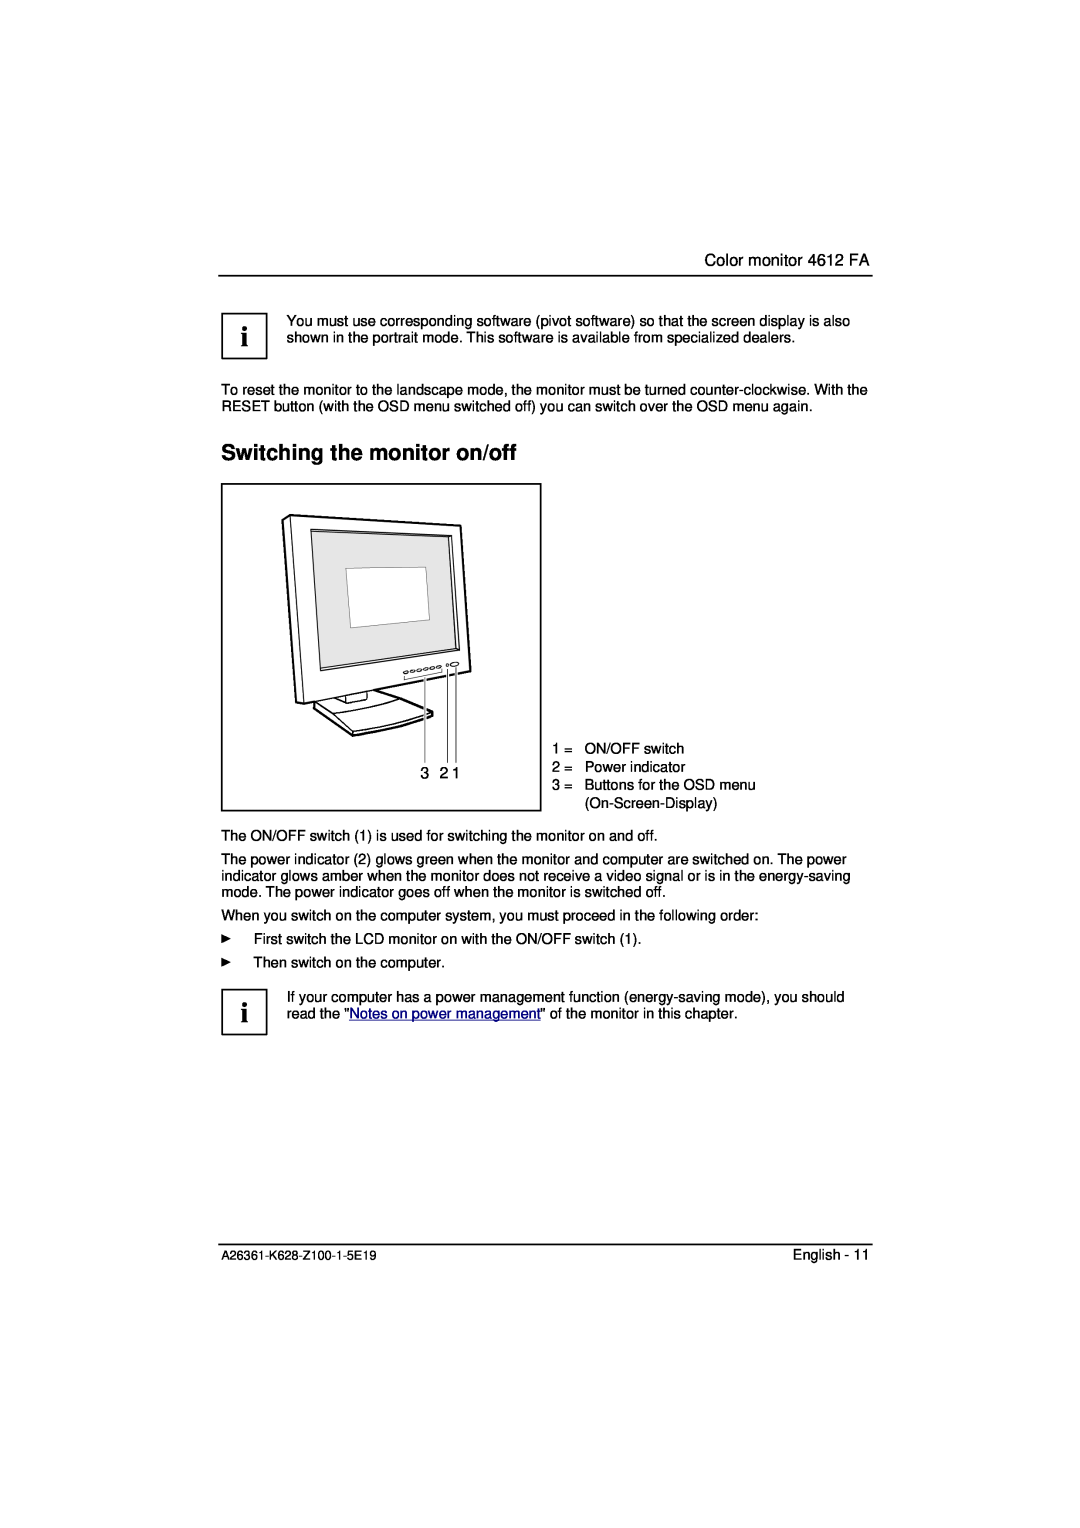 Fujitsu Siemens Computers manual Switching the monitor on/off, Color monitor 4612 FA 